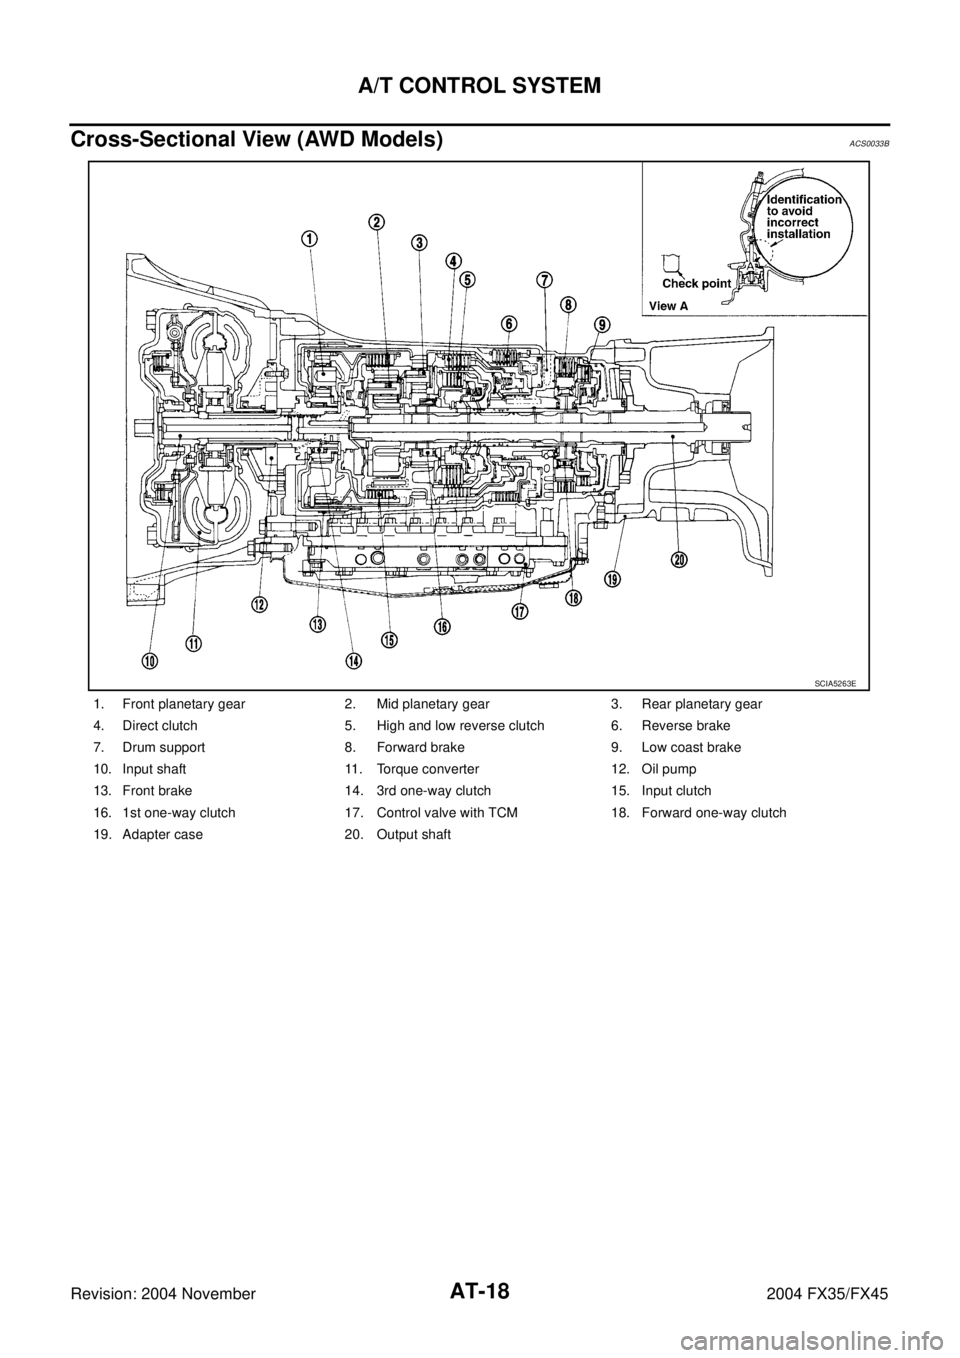 INFINITI FX35 2004  Service Manual AT-18
A/T CONTROL SYSTEM
Revision: 2004 November 2004 FX35/FX45
Cross-Sectional View (AWD Models)ACS0033B
1. Front planetary gear 2. Mid planetary gear 3. Rear planetary gear
4. Direct clutch 5. High 